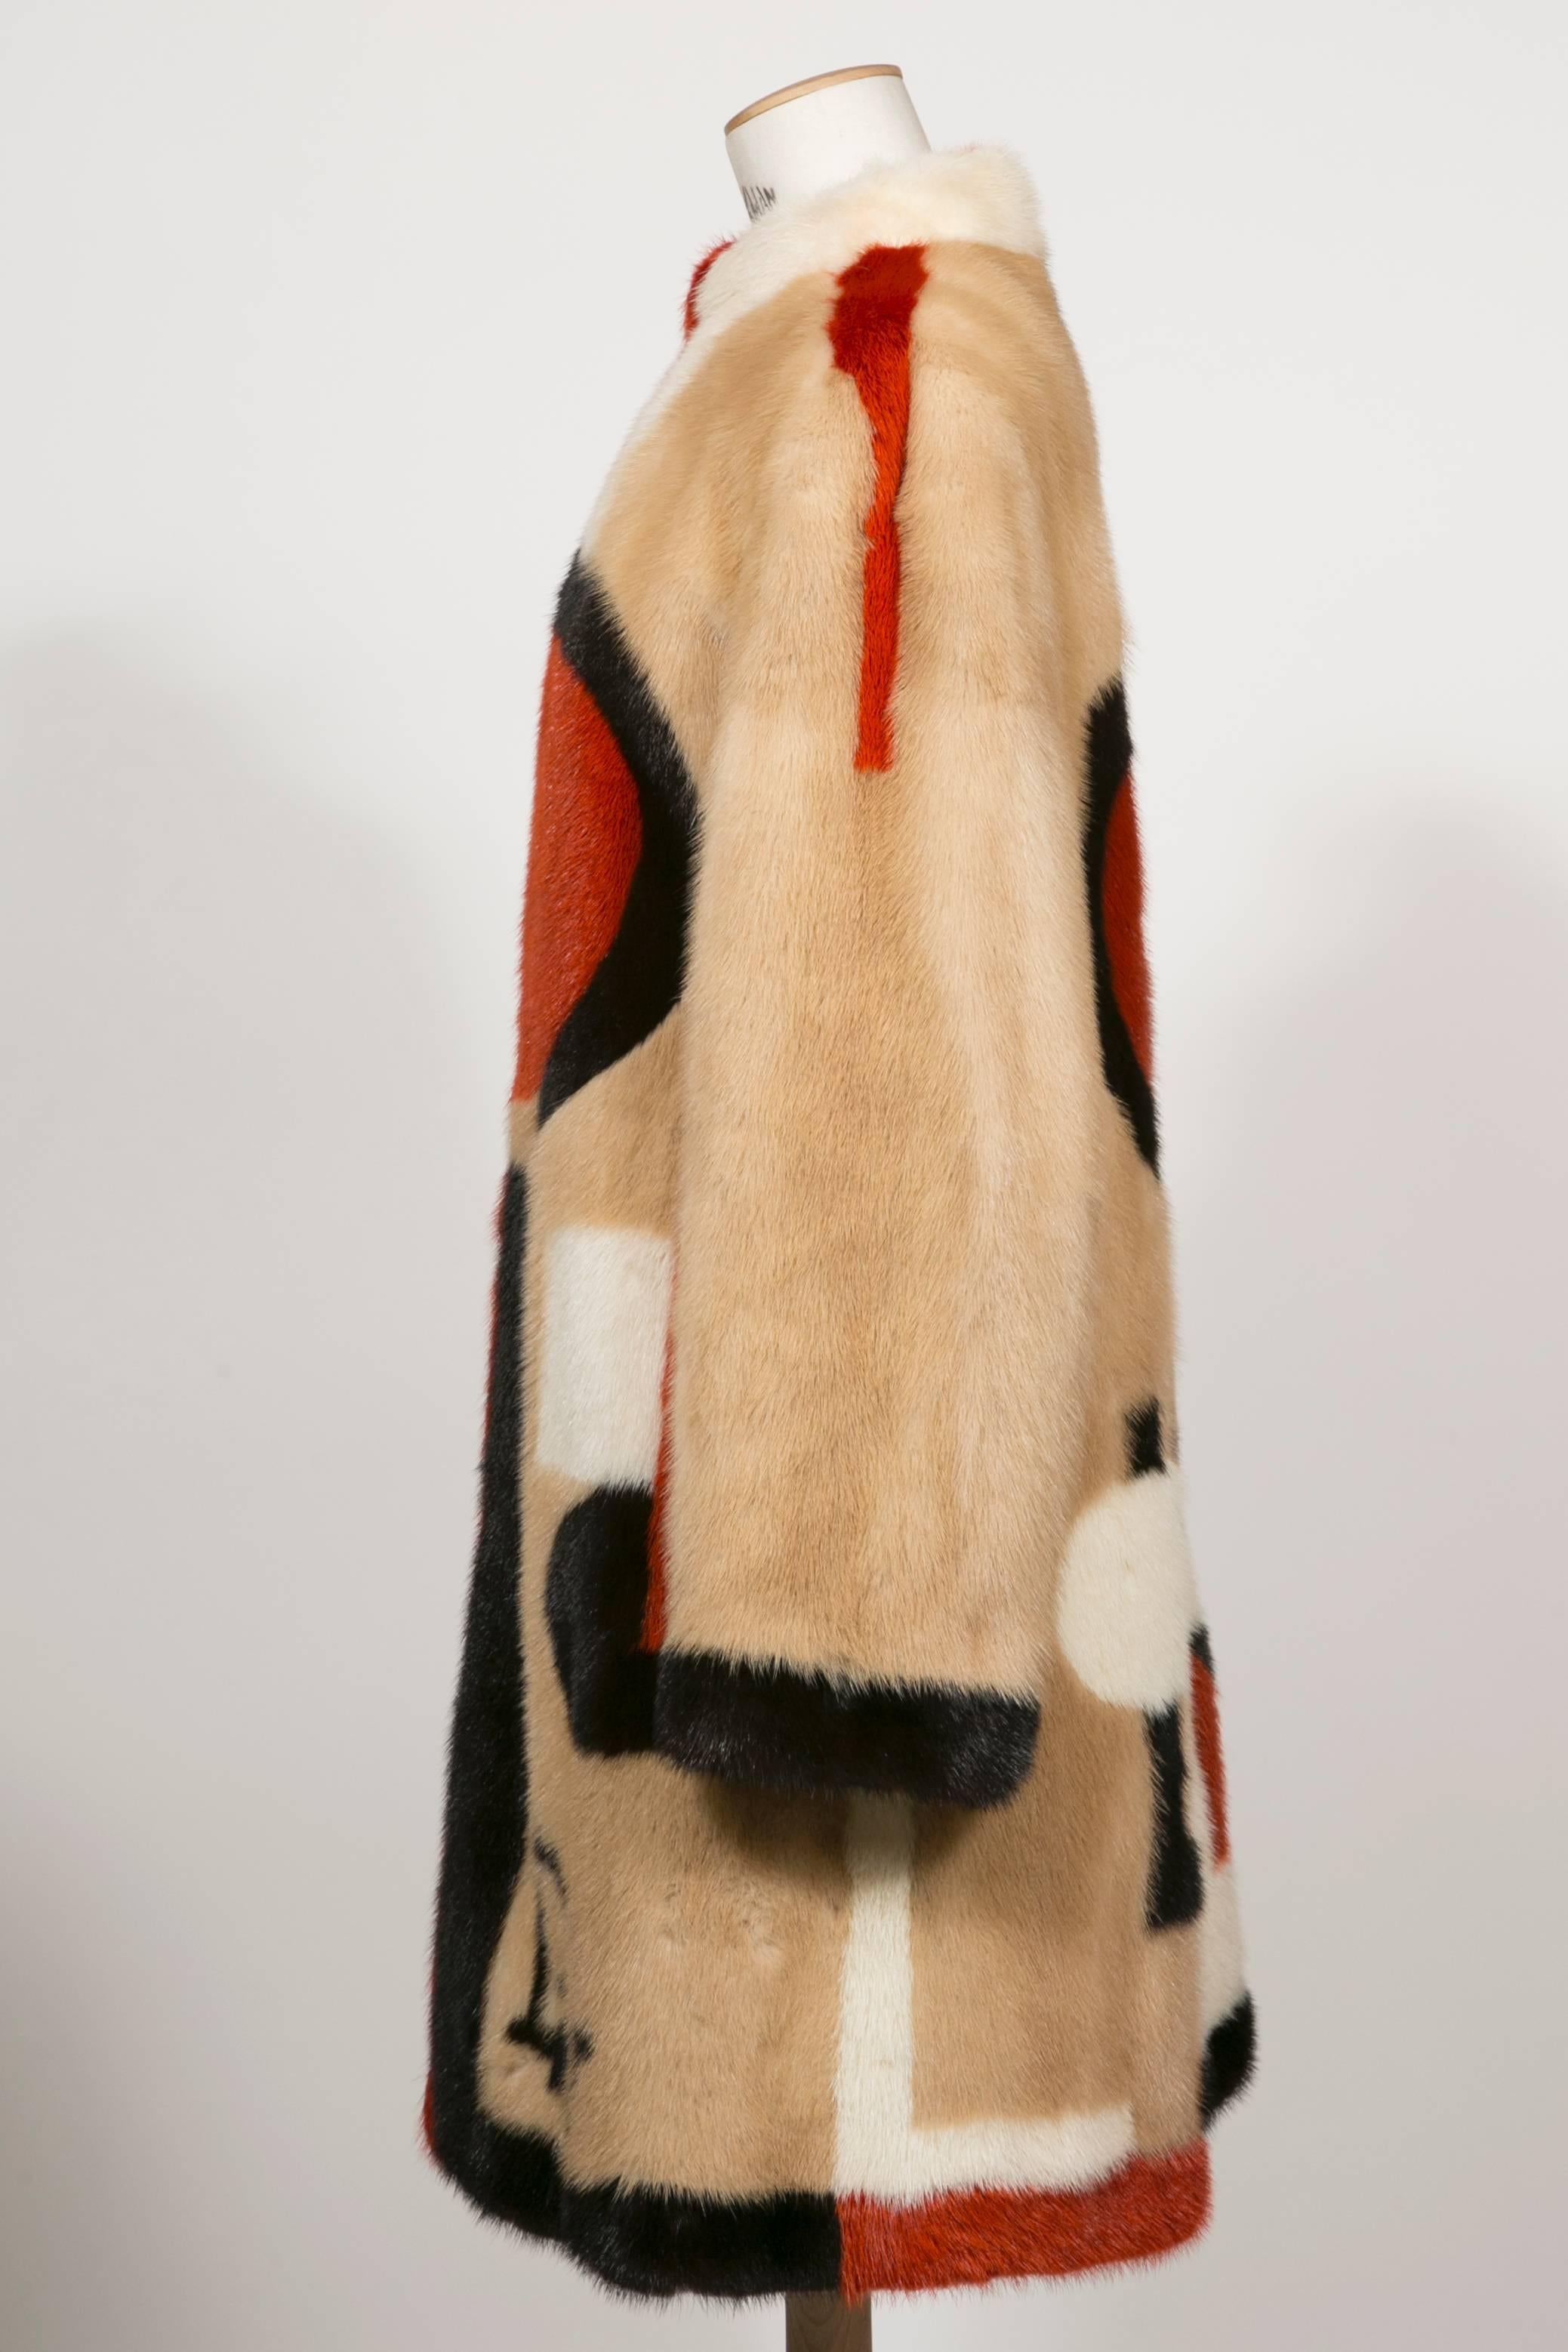 1985/90 Christian Dior Fabulous Suprematism Malevitch Mink Coat :
This mink coat was a special order at Christian Dior : inspired by a Malevitch  painting   . The colors are cream , beige ,écru, dark orange and black
The lining is 